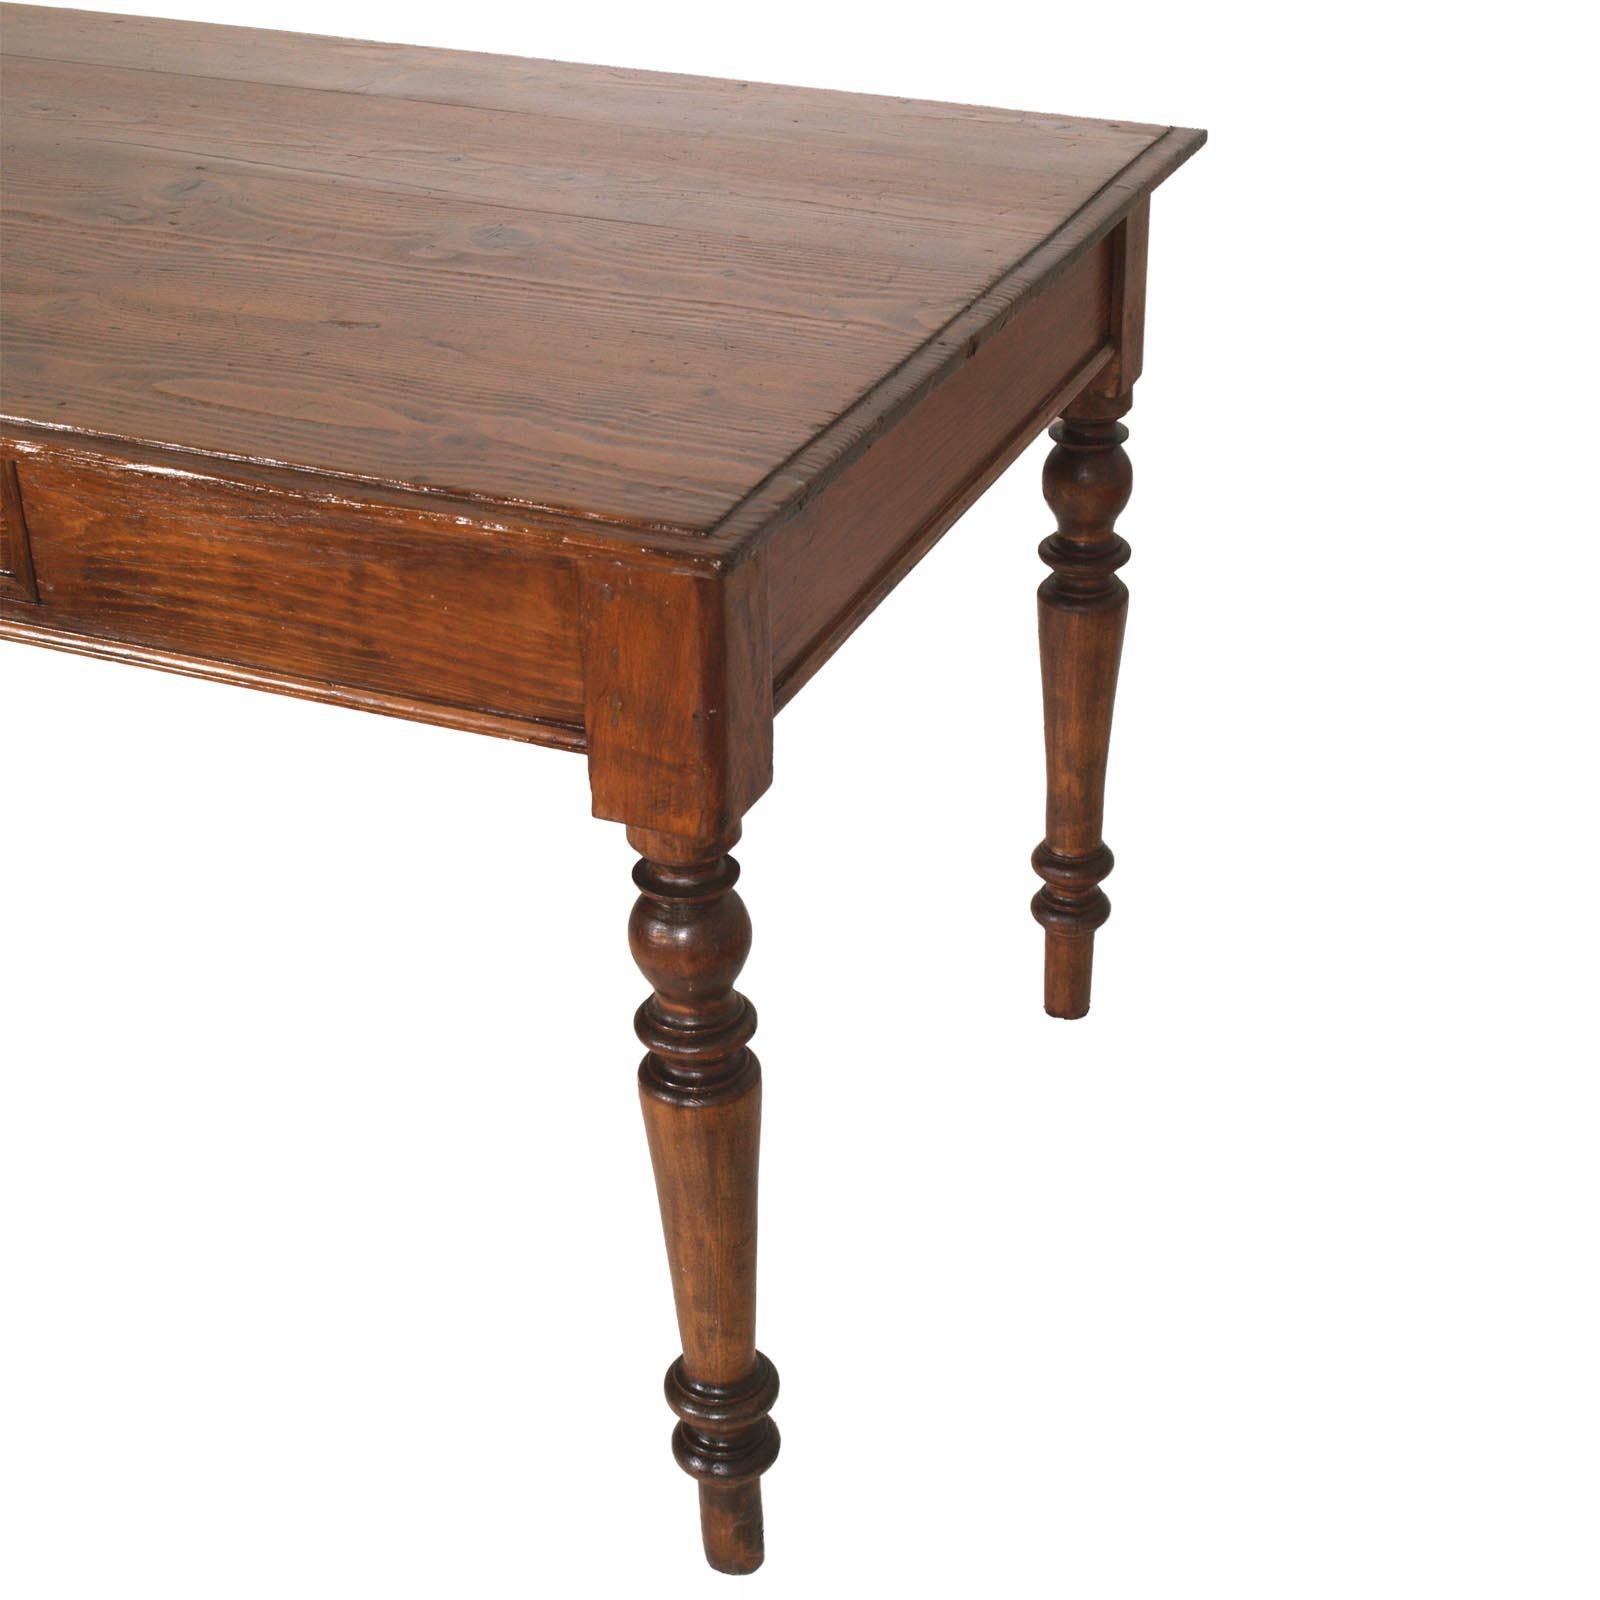 Neoclassical Revival 1850s Italian Country Neoclassic Rustic Table Desk, One Drawer, Wax-Polished For Sale